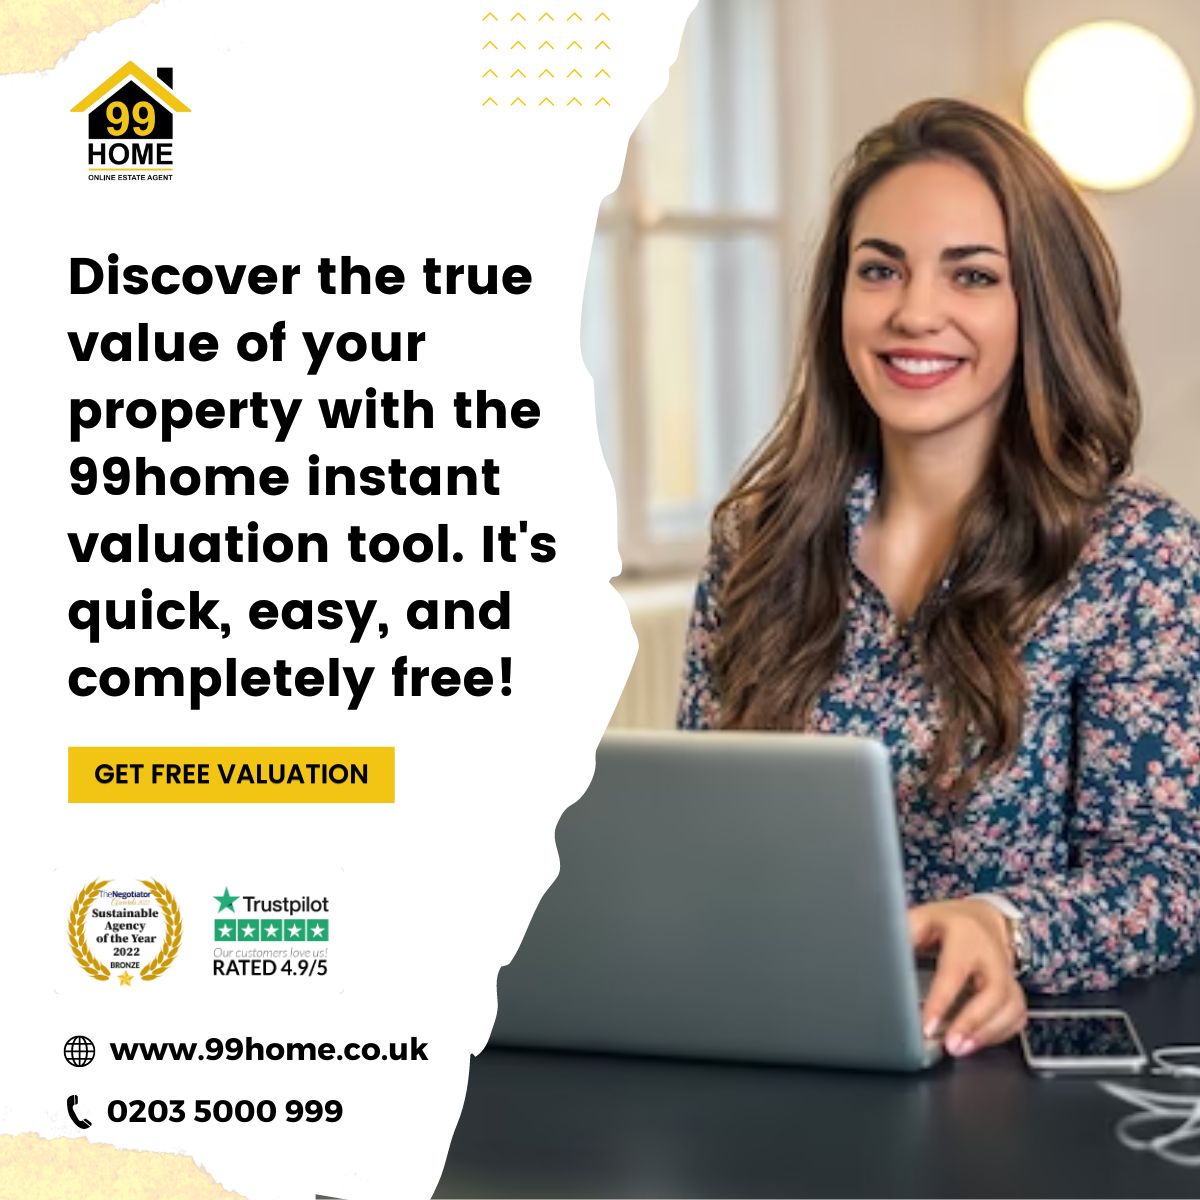 Discover the true value of your property with the 99home instant valuation tool. It's quick, easy, and completely free! 

#SellProperty #SellHouse #SellHome #Buy #Sell #Let #OnlineEstateAgent #OnlineAgent #99home  #propertymanagement